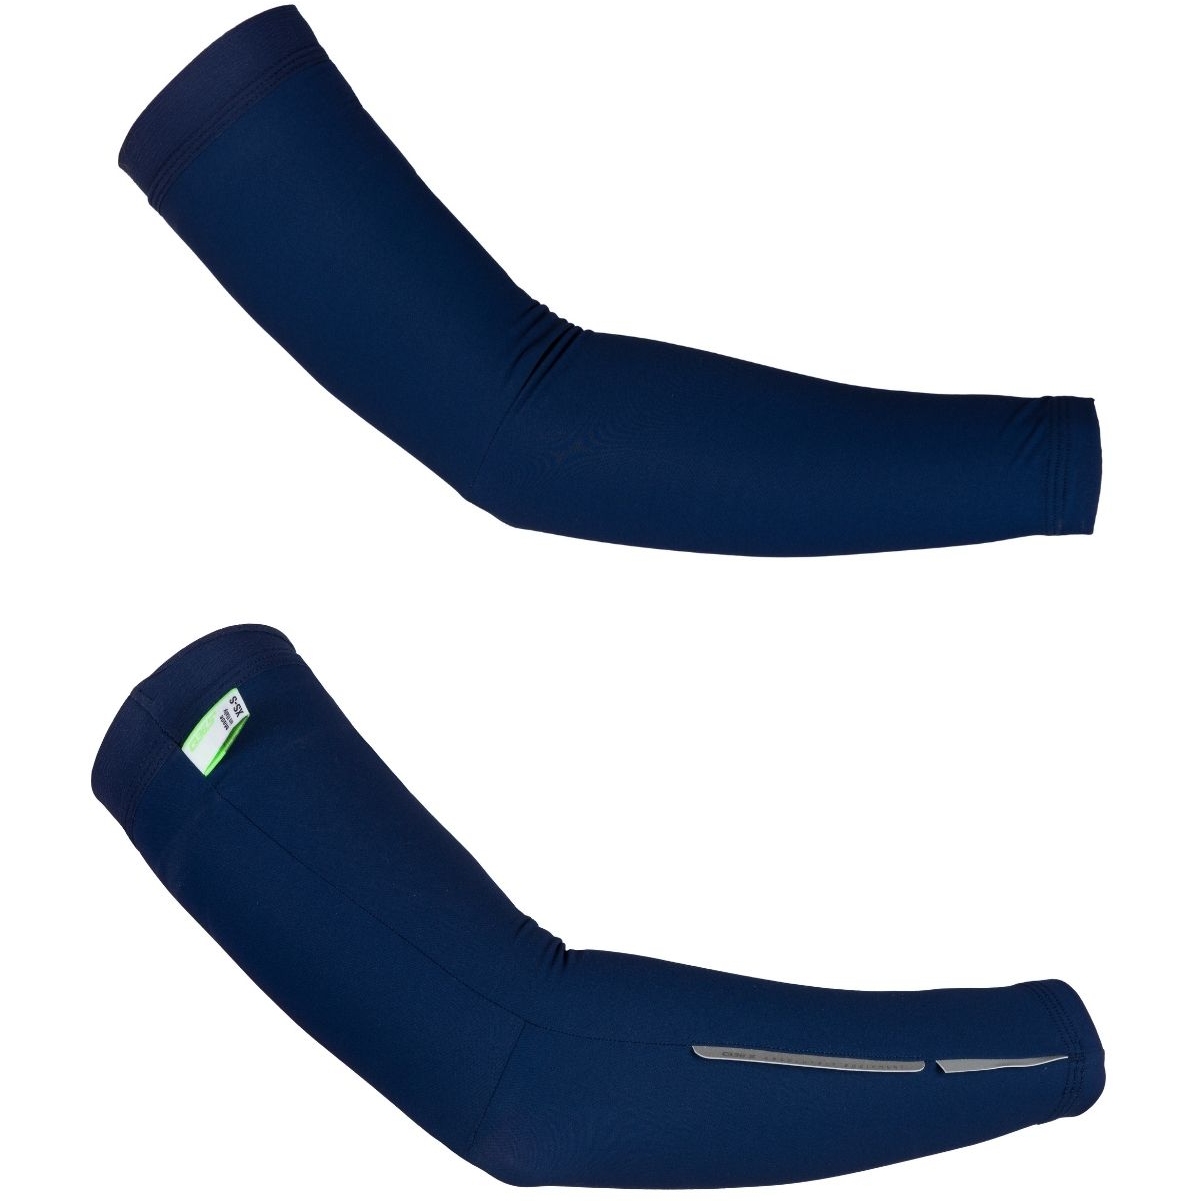 Picture of Q36.5 Woolf Arm Warmer - navy